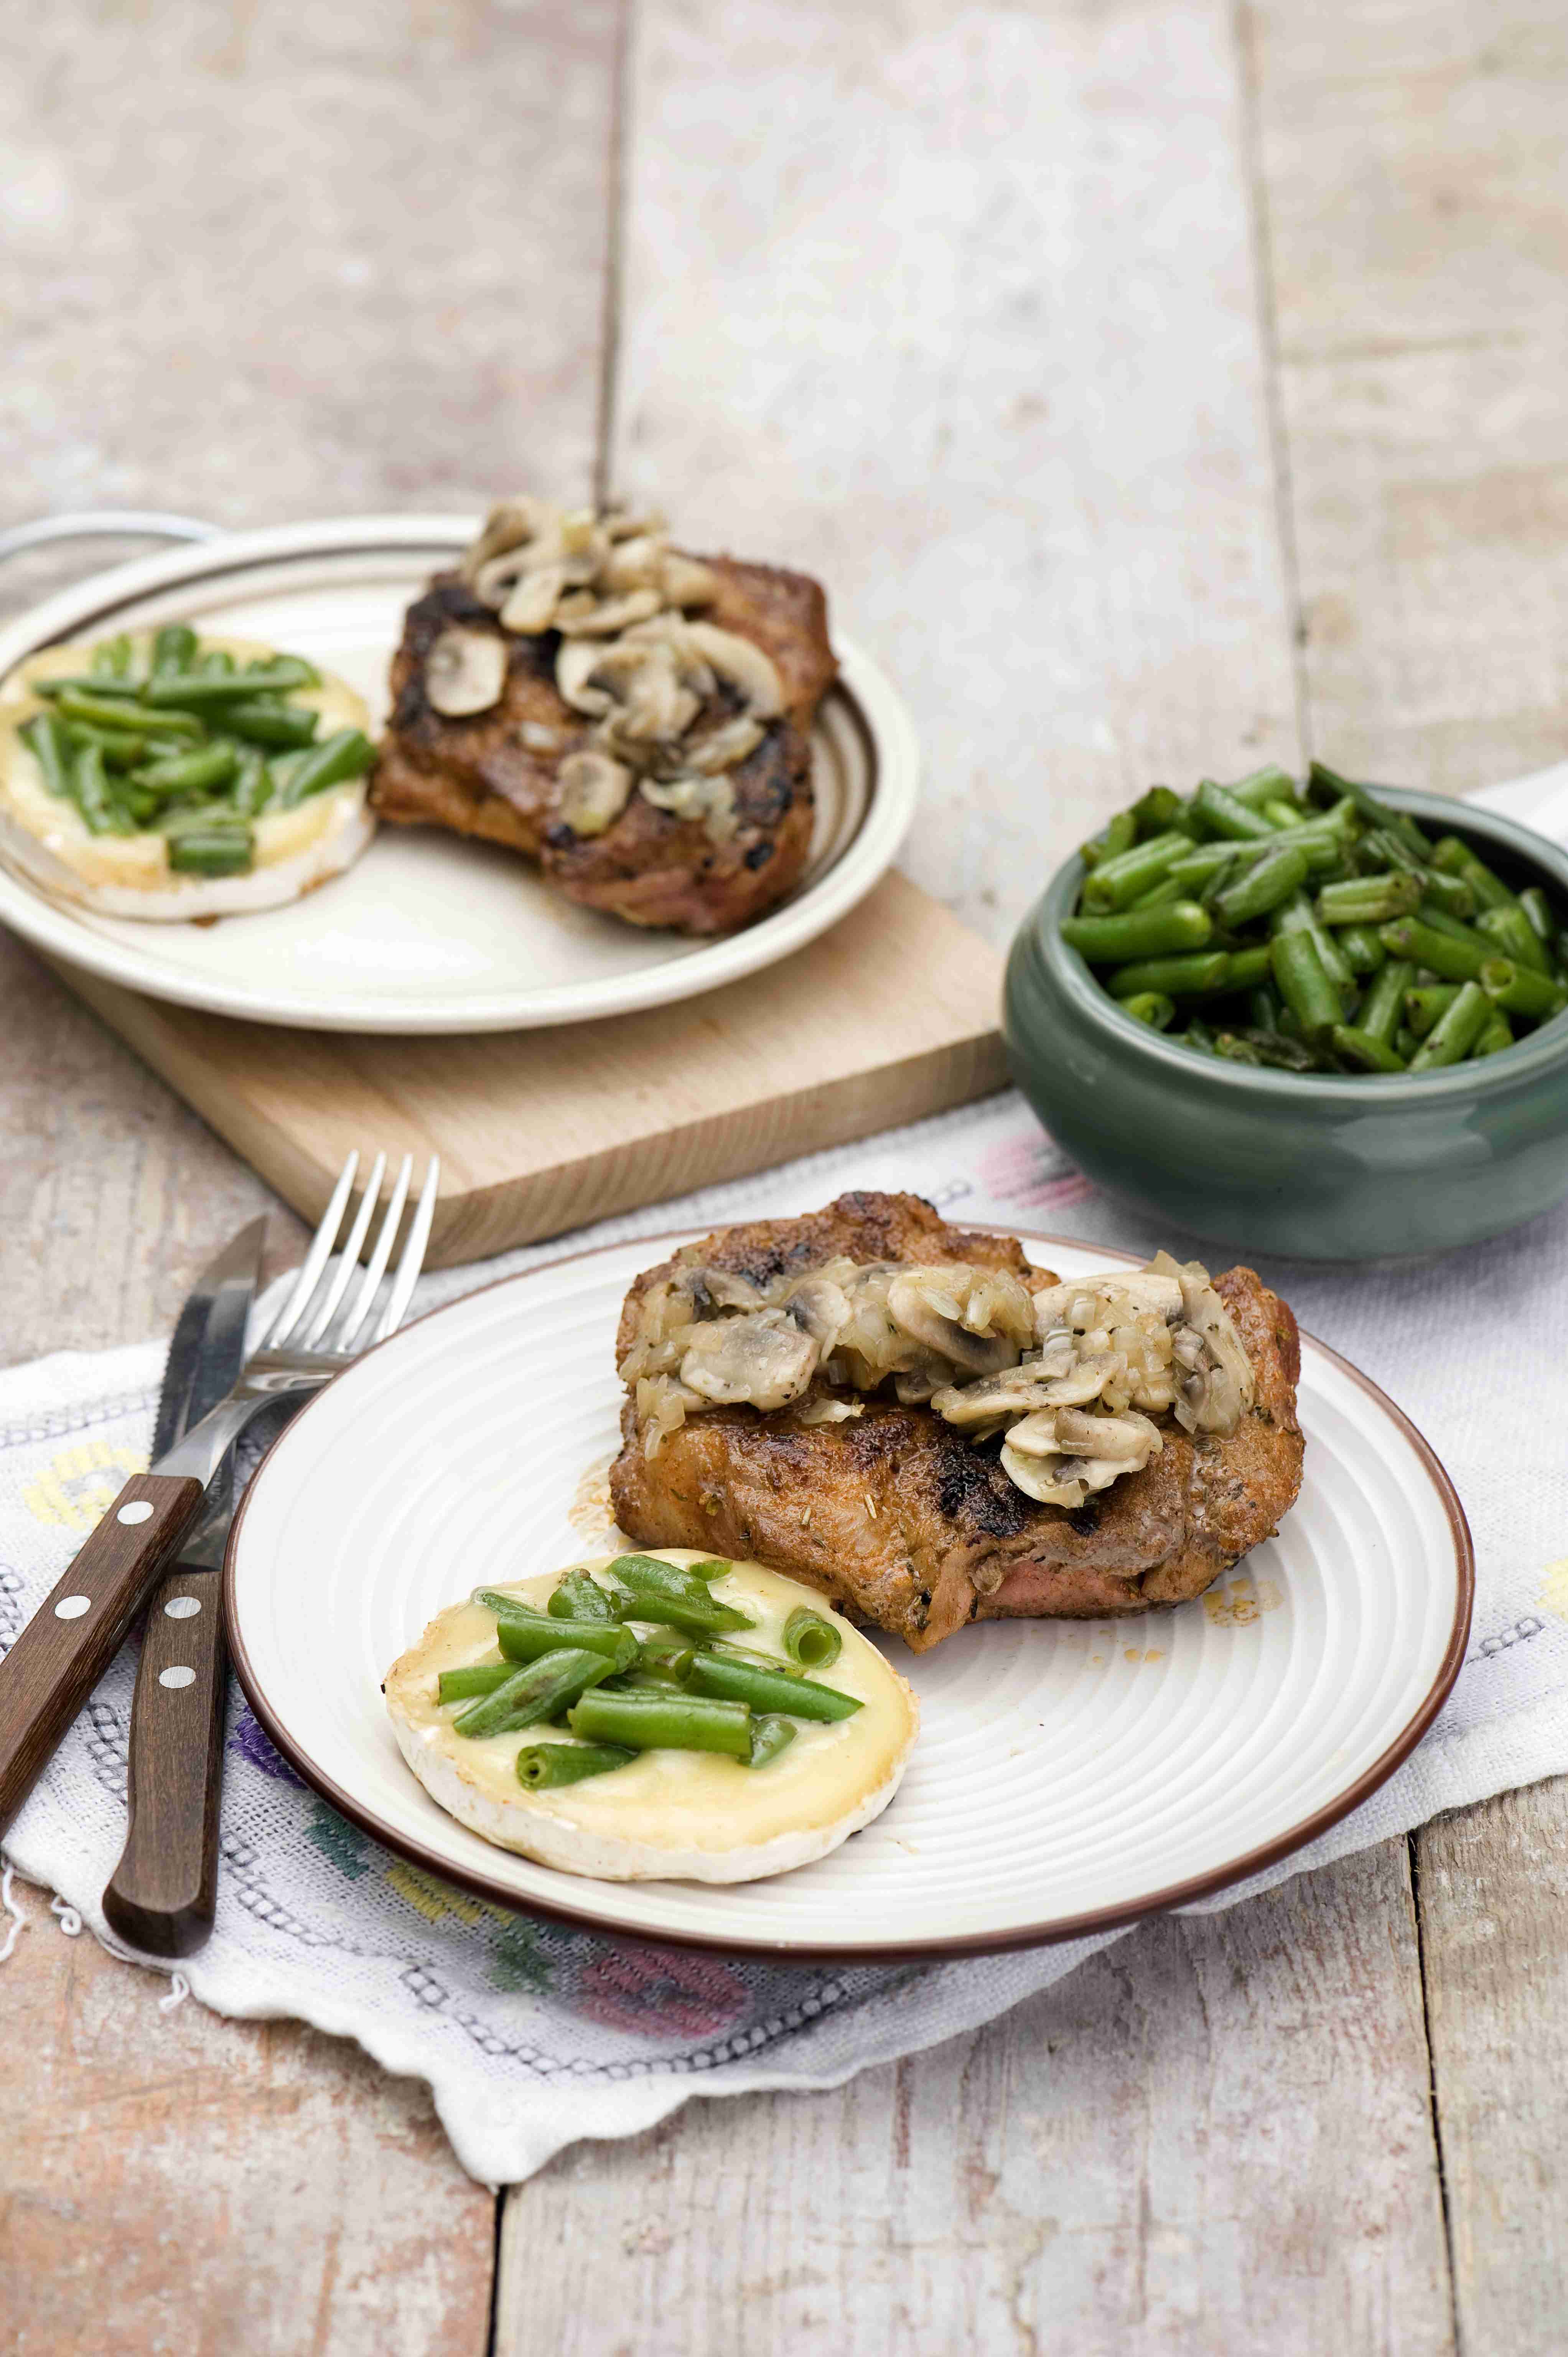 Pork steak with camembert and green beans